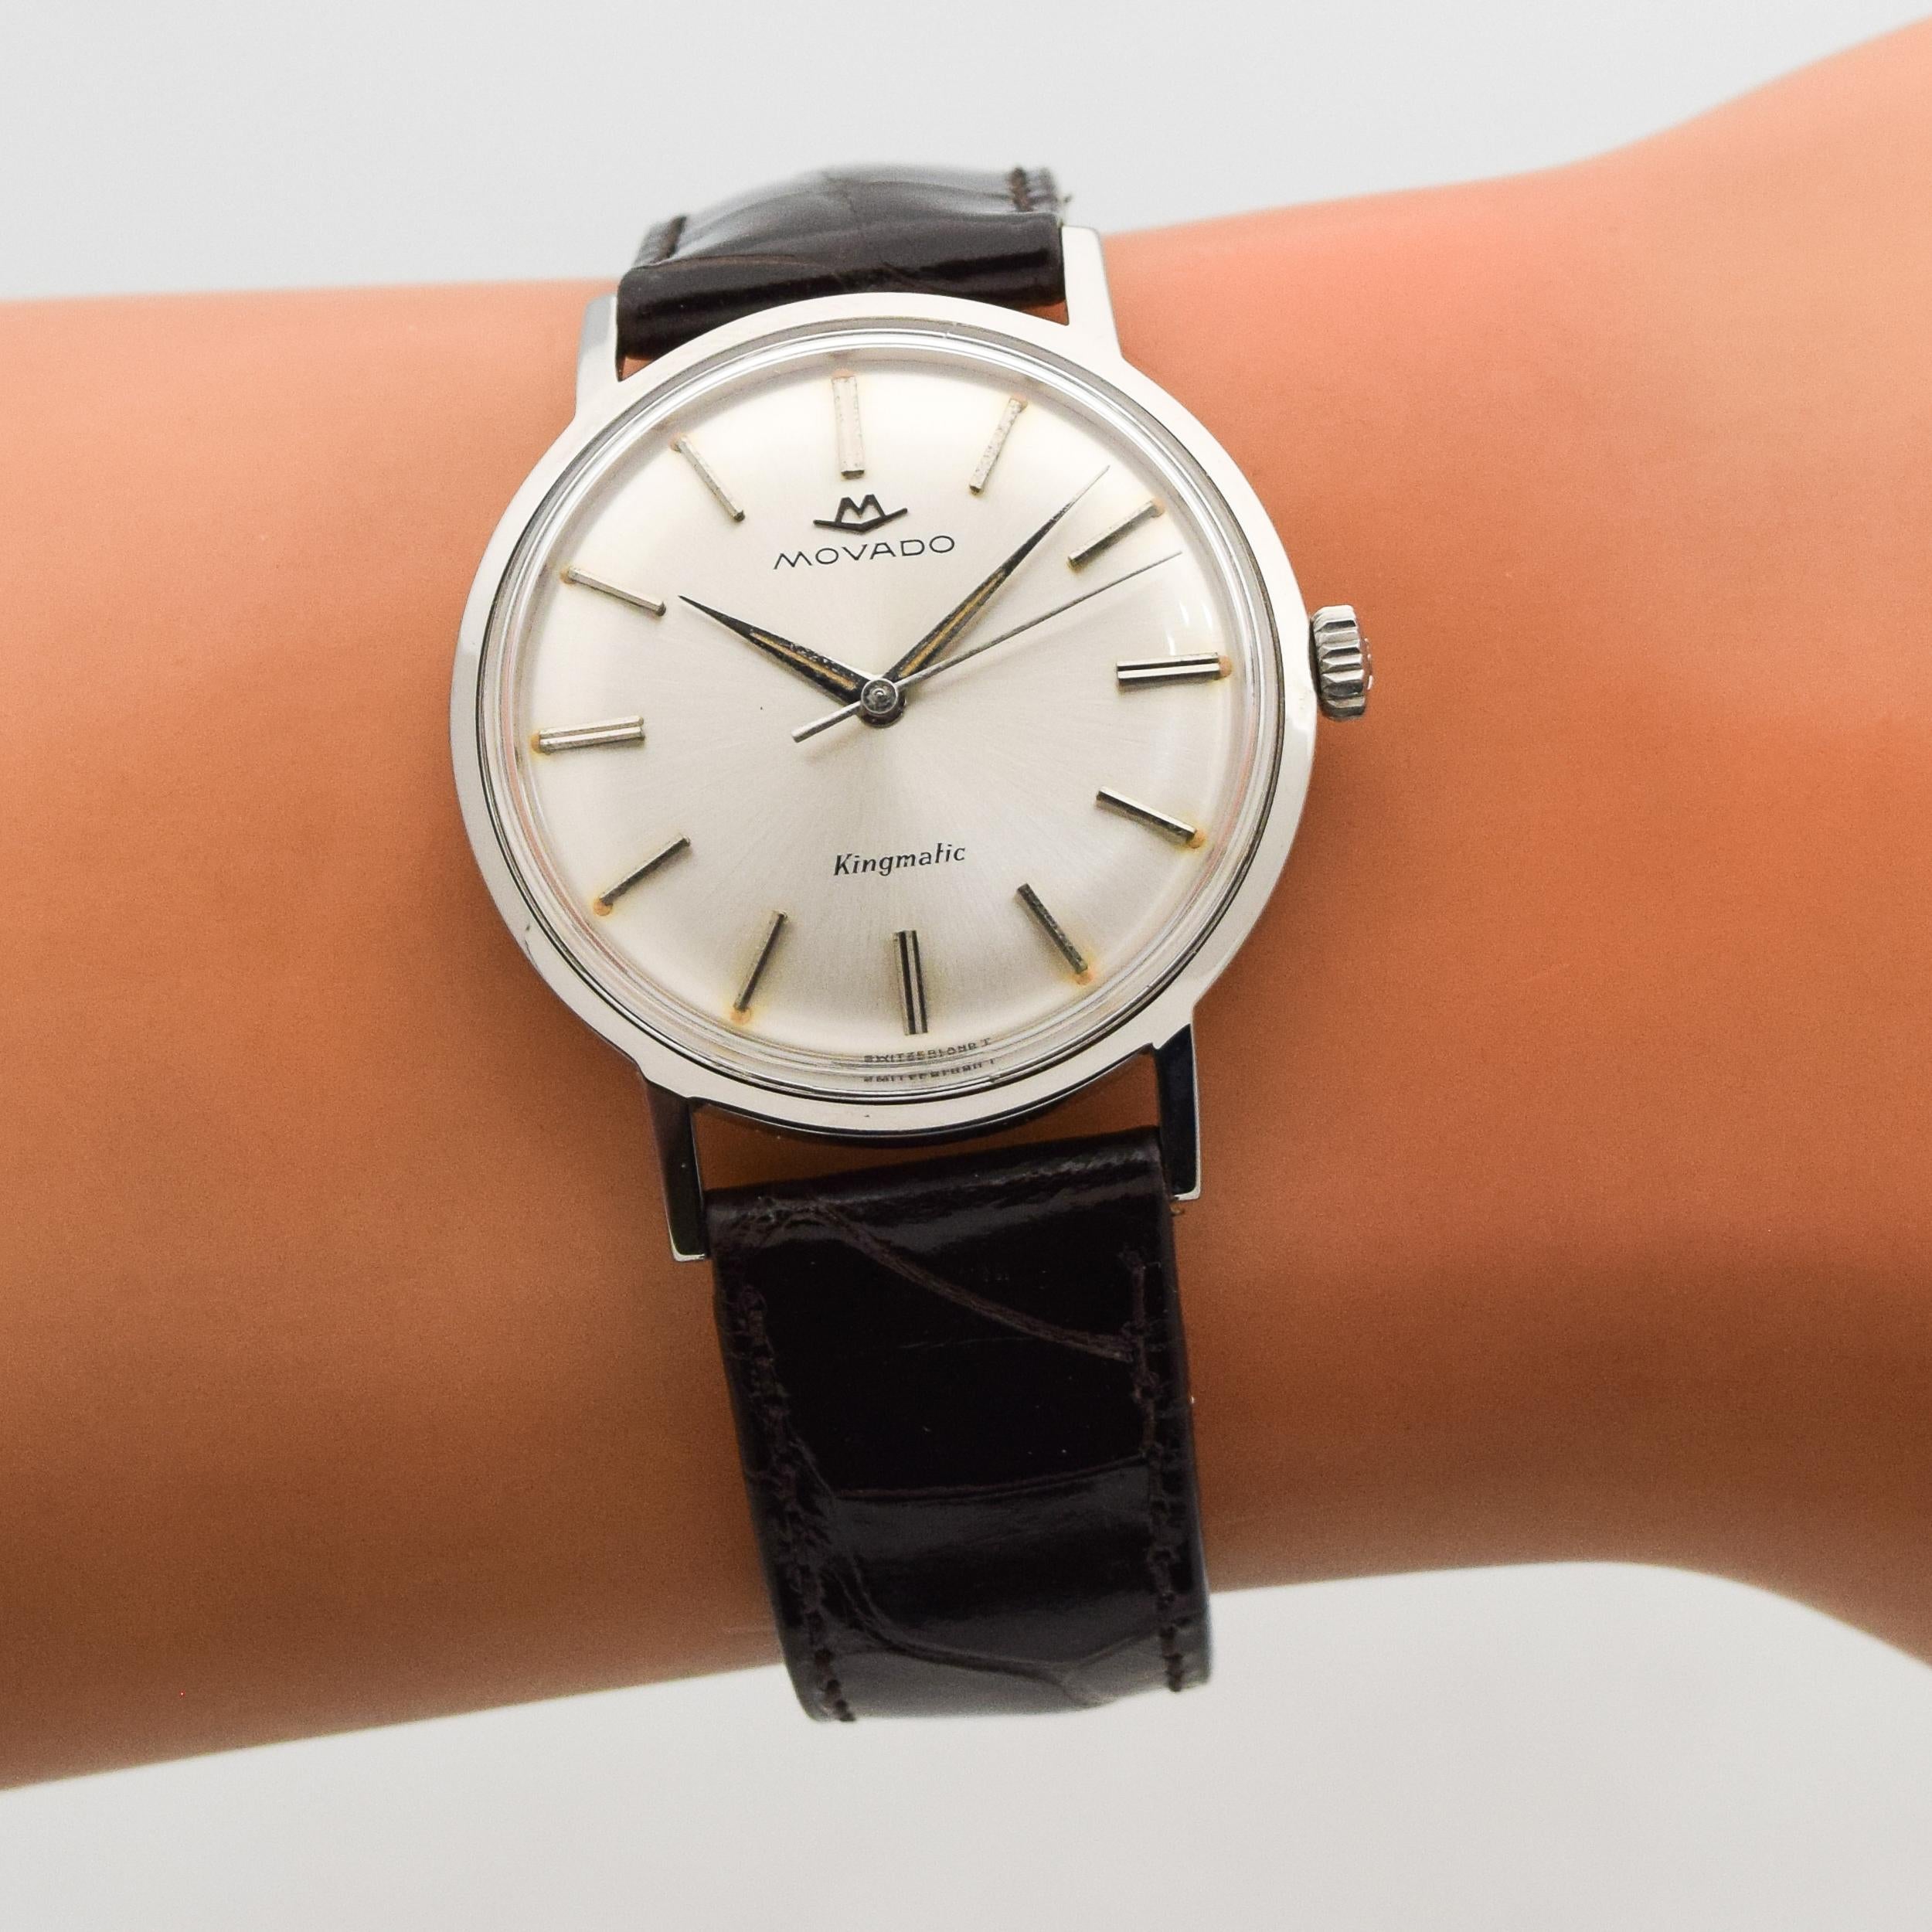 Vintage Movado Kingmatic Sub-Sea Stainless Steel Watch, 1960s For Sale 1